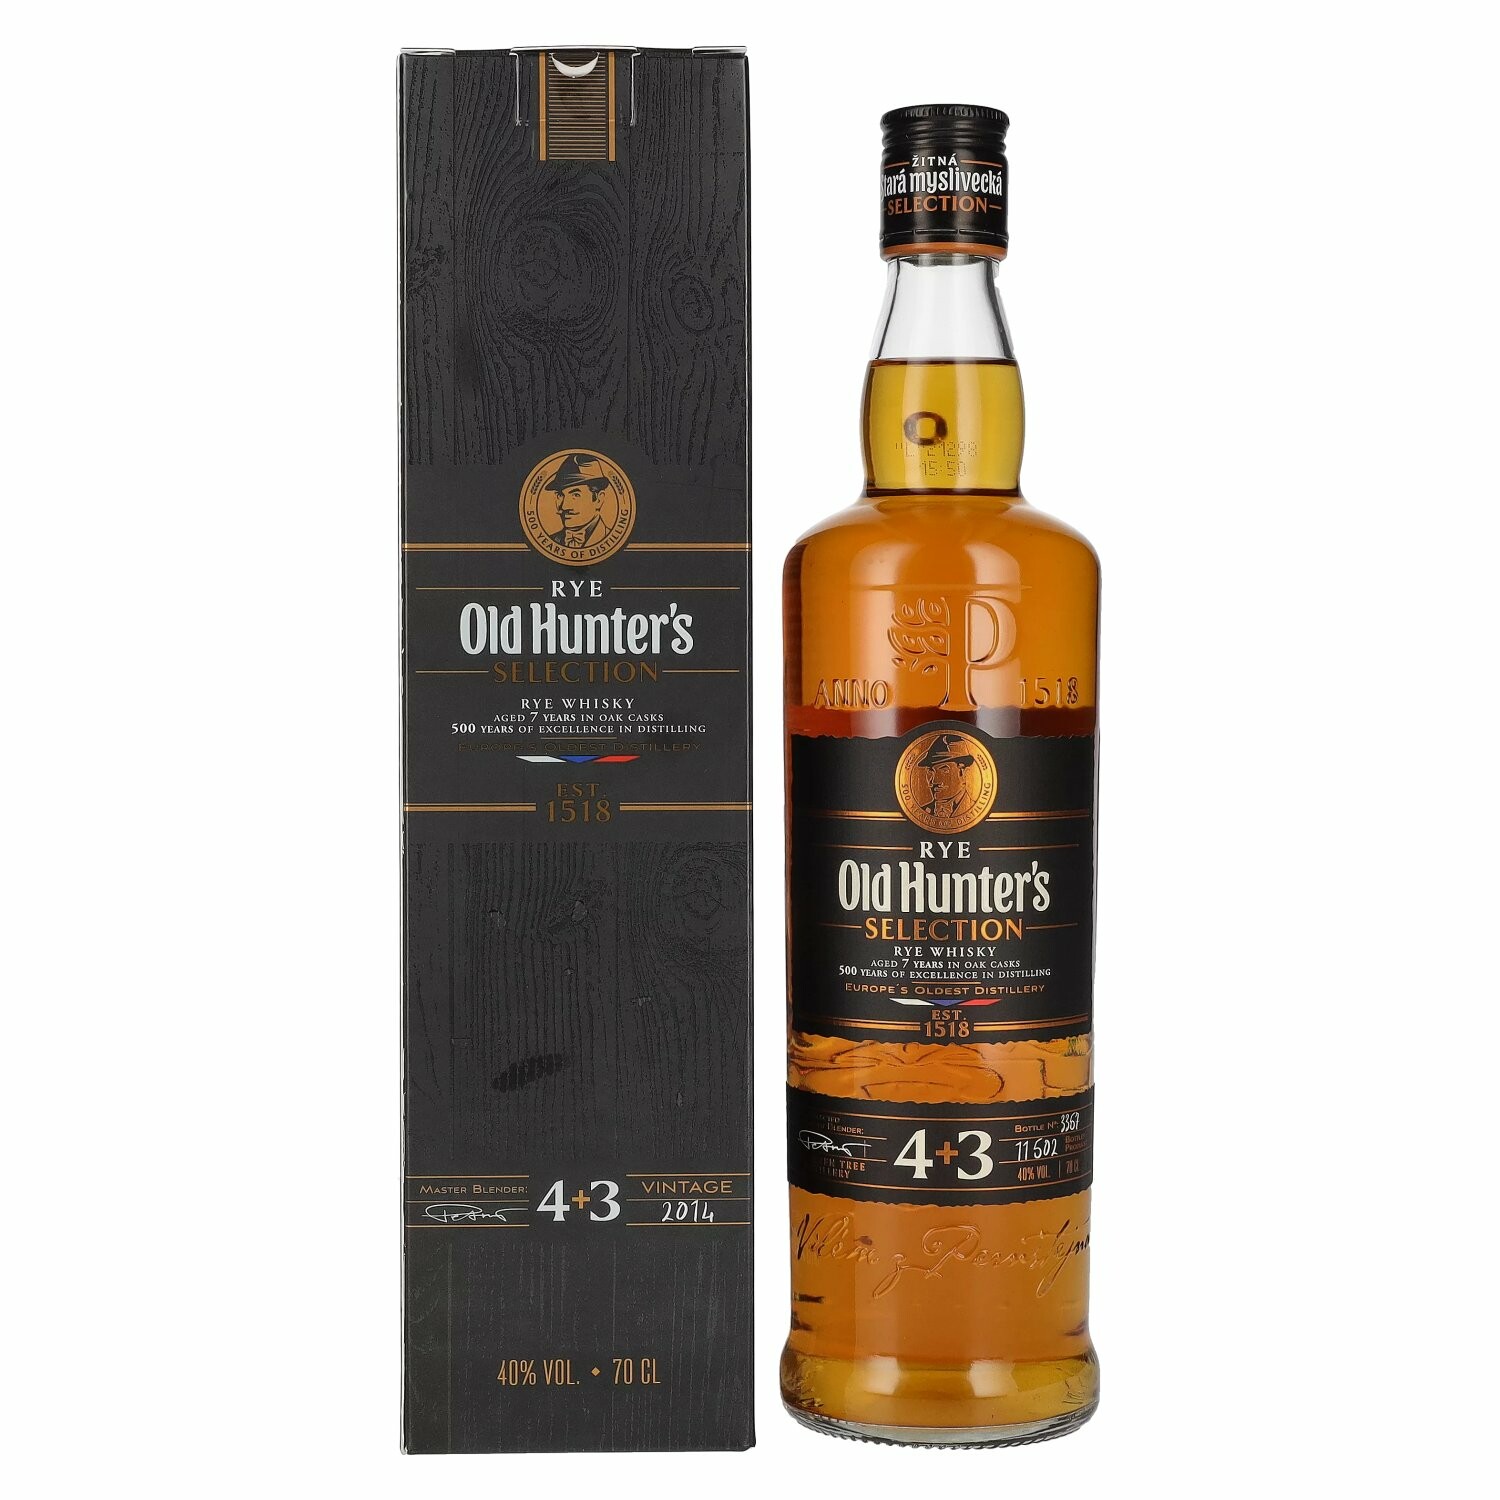 Old Hunter's 7 Years Old SELECTION Rye Whisky 2014 40% Vol. 0,7l in Giftbox